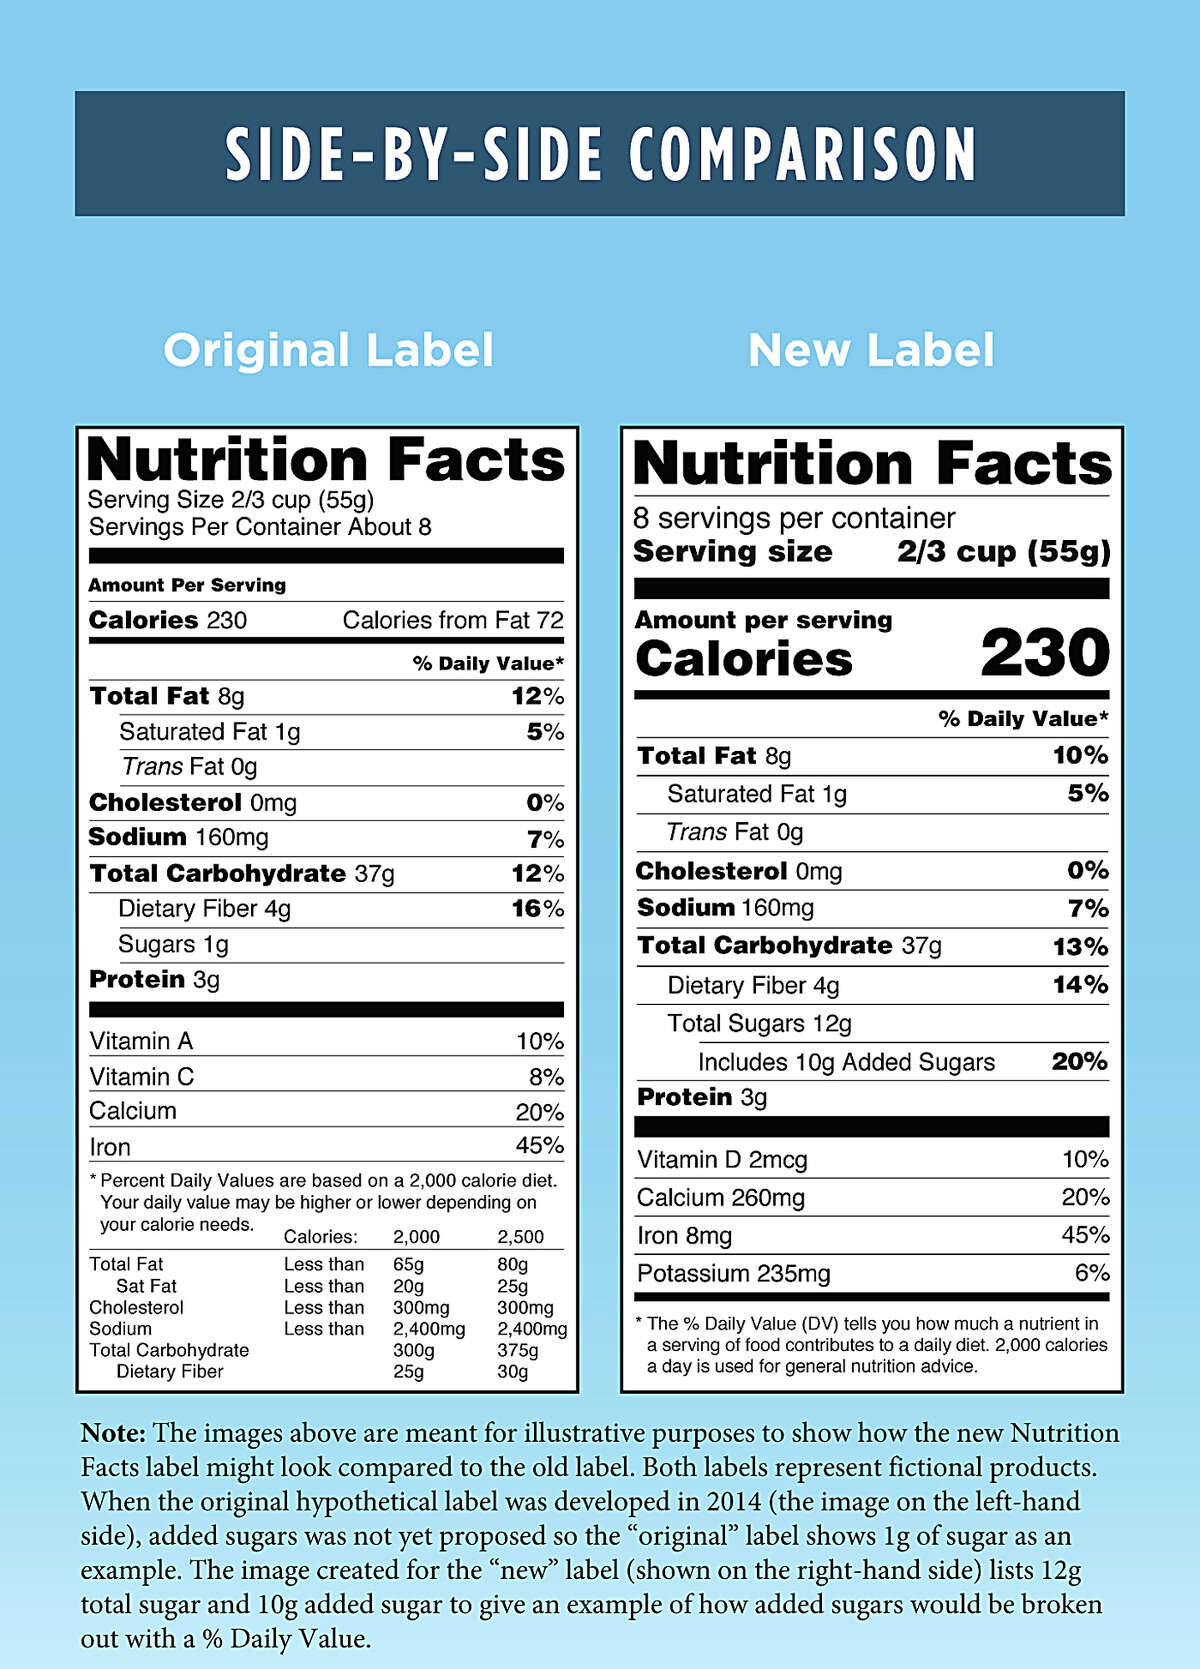 FILE - This file photo provided by the Food and Drug Administration shows a side-by-side comparison of the old, left, and new food Nutrition Facts labels. The revamped Nutrition Facts panel that the FDA announced on Tuesday, June 13, 2017, was being delayed, could also change what companies get to count as fiber. The FDA hasnÂ?’t yet cleared 26 ingredients that the industry can currently count as fiber to continue being counted as fiber on the new panel. The unsettled details are partly why the industry has called for delaying the deadline to use the new panel. Others say extending the deadline will only lead to confusion. (Food and Drug Administration via AP, File)